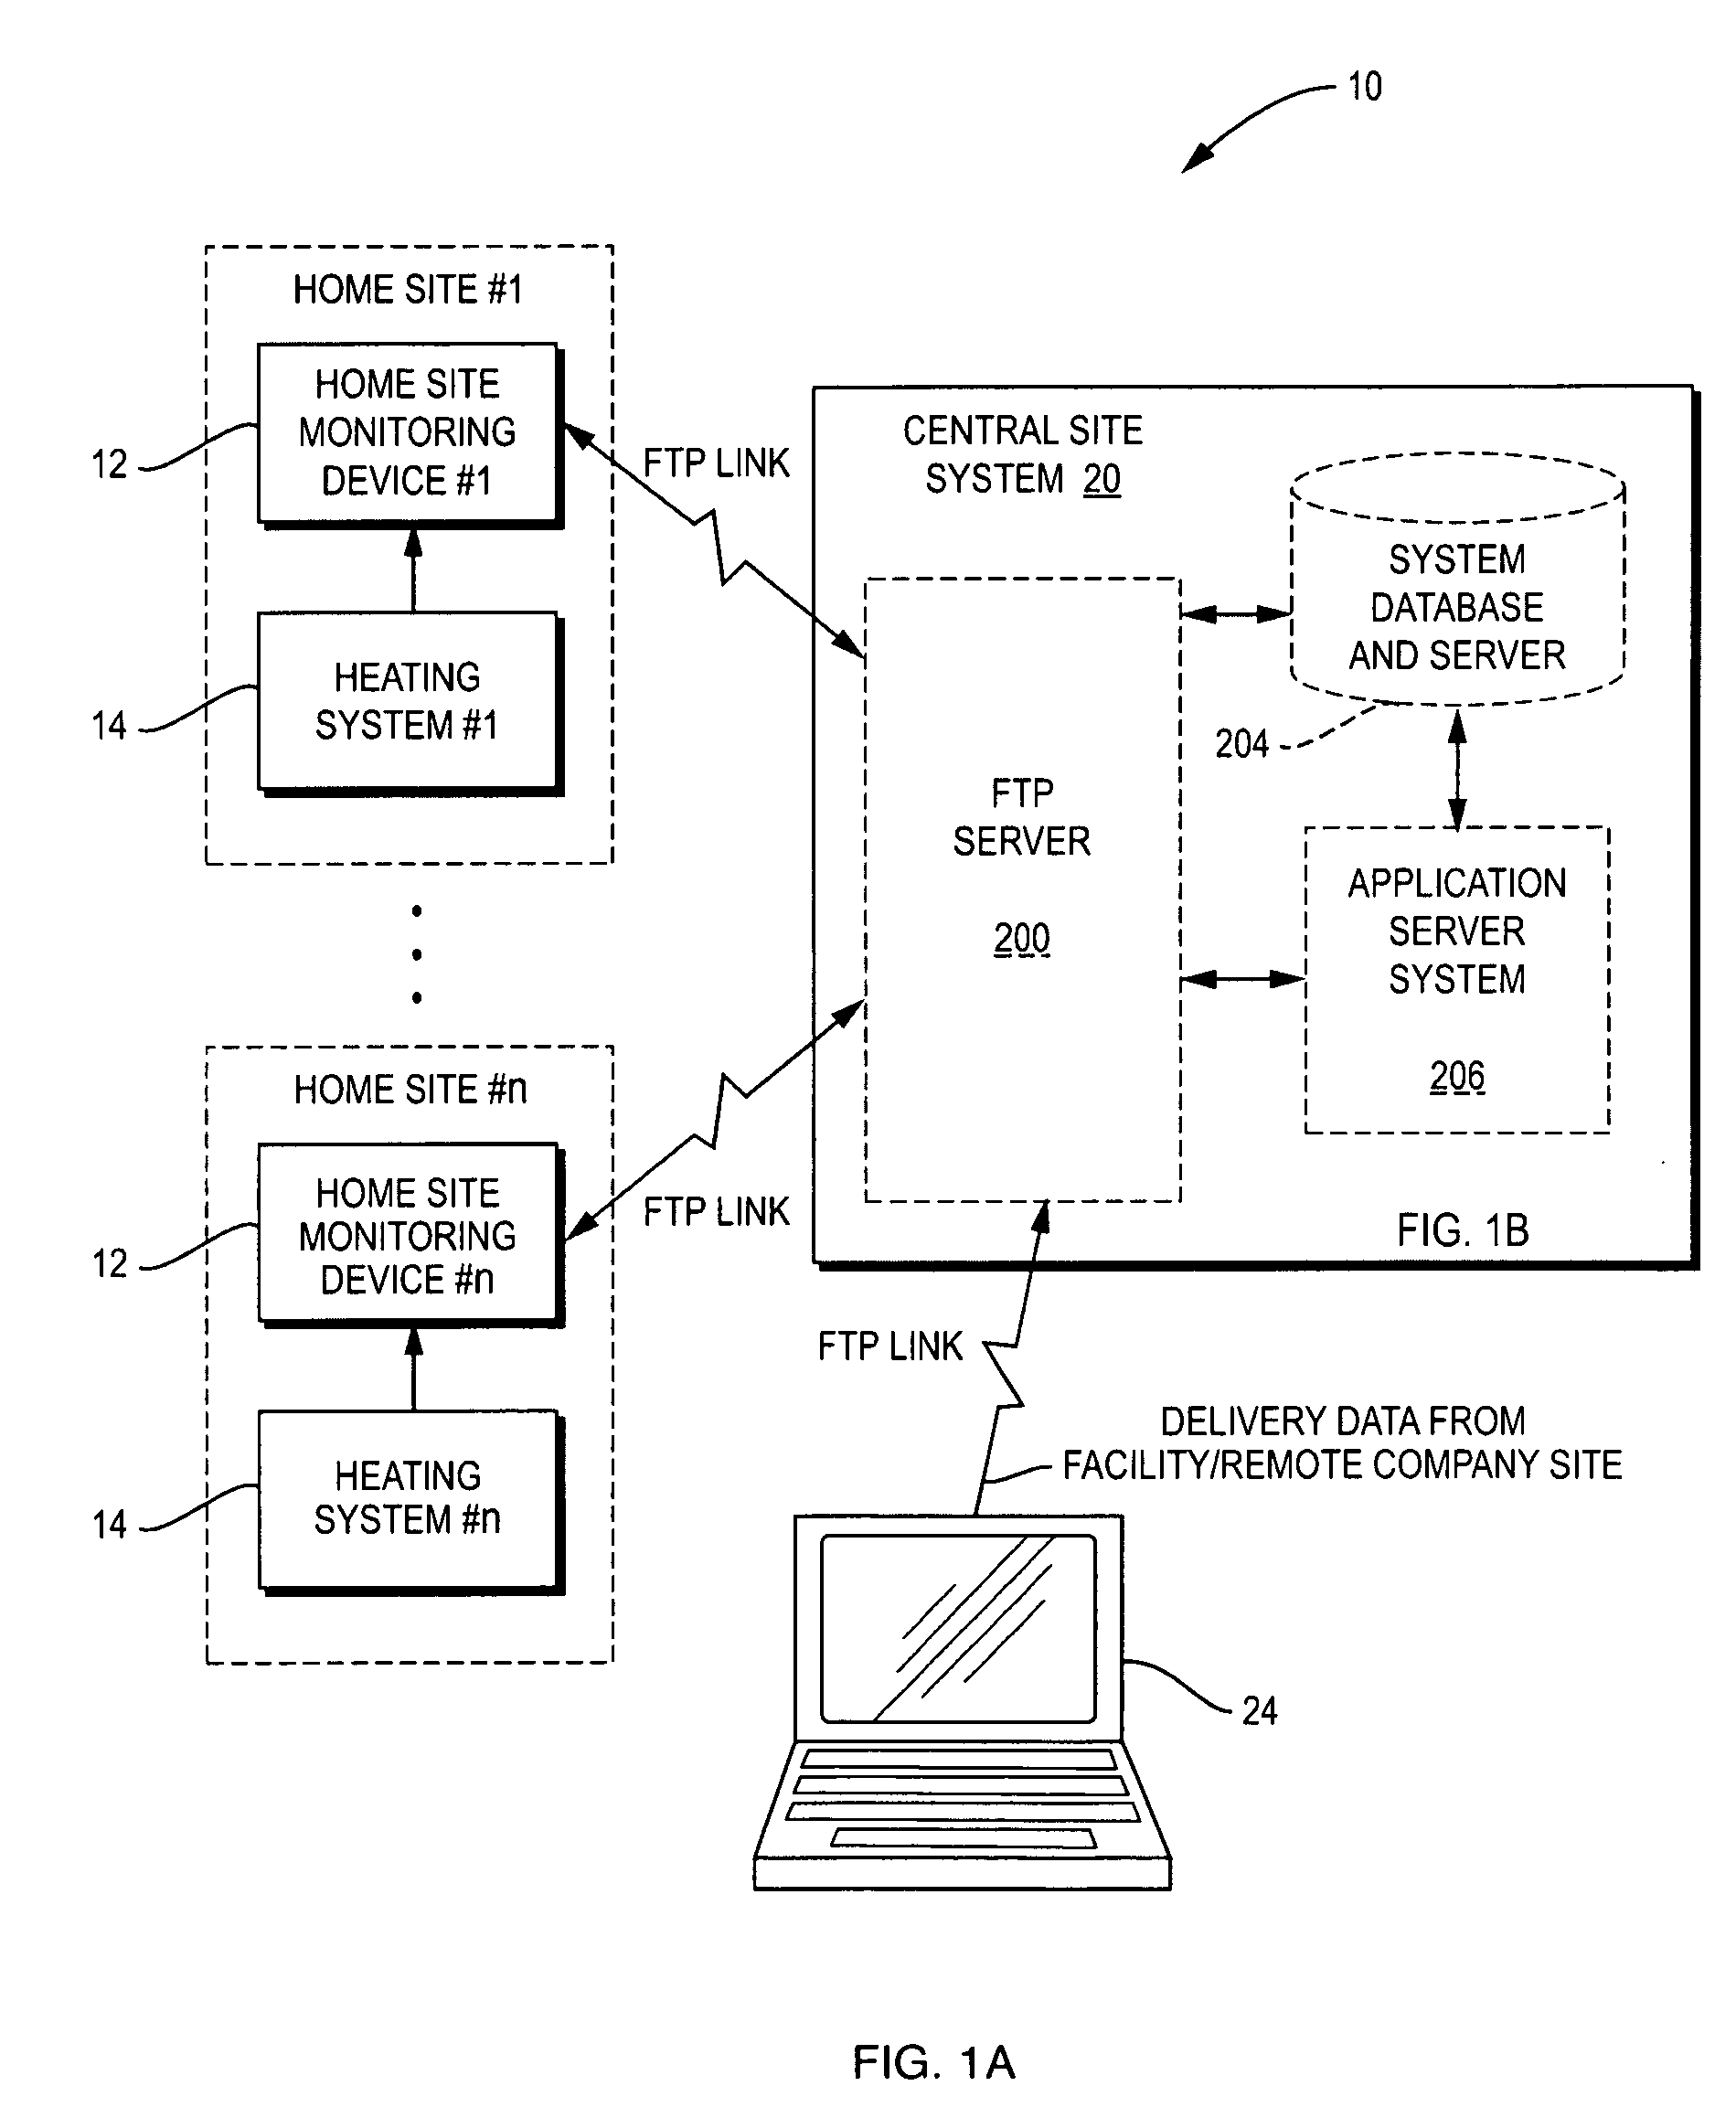 Self calibrating home site fuel usage monitoring device and system